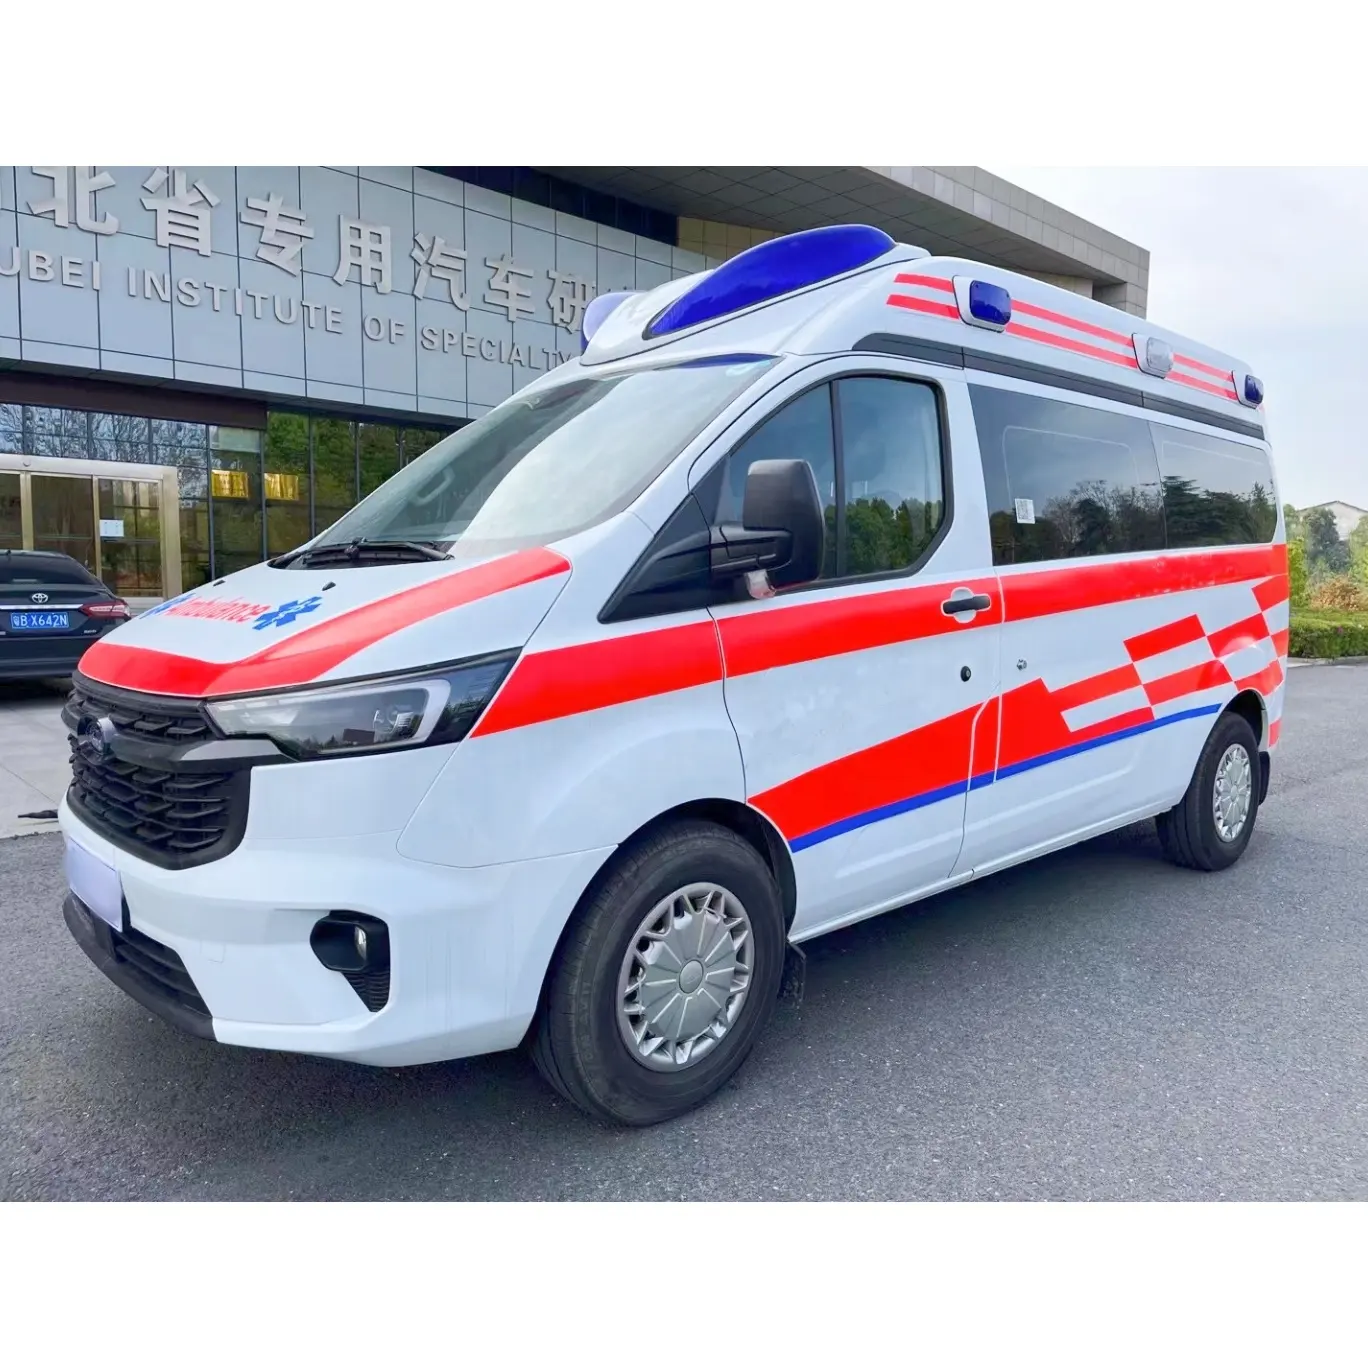 Mobile Ward-type Emergency Car for sale